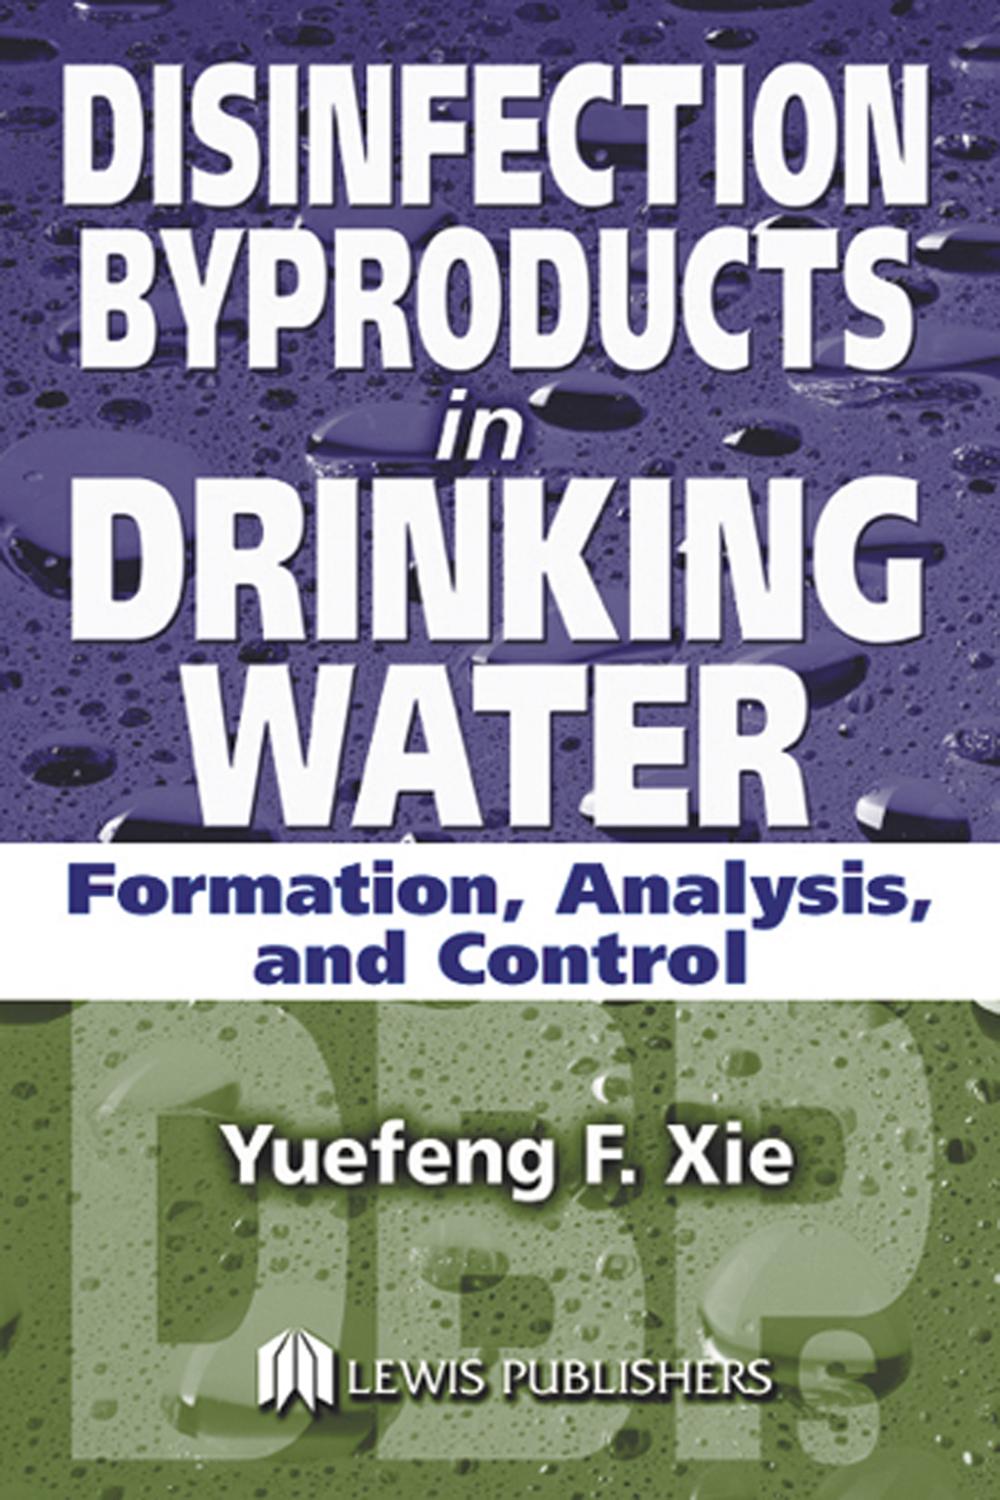 Disinfection Byproducts in Drinking Water - Yuefeng Xie